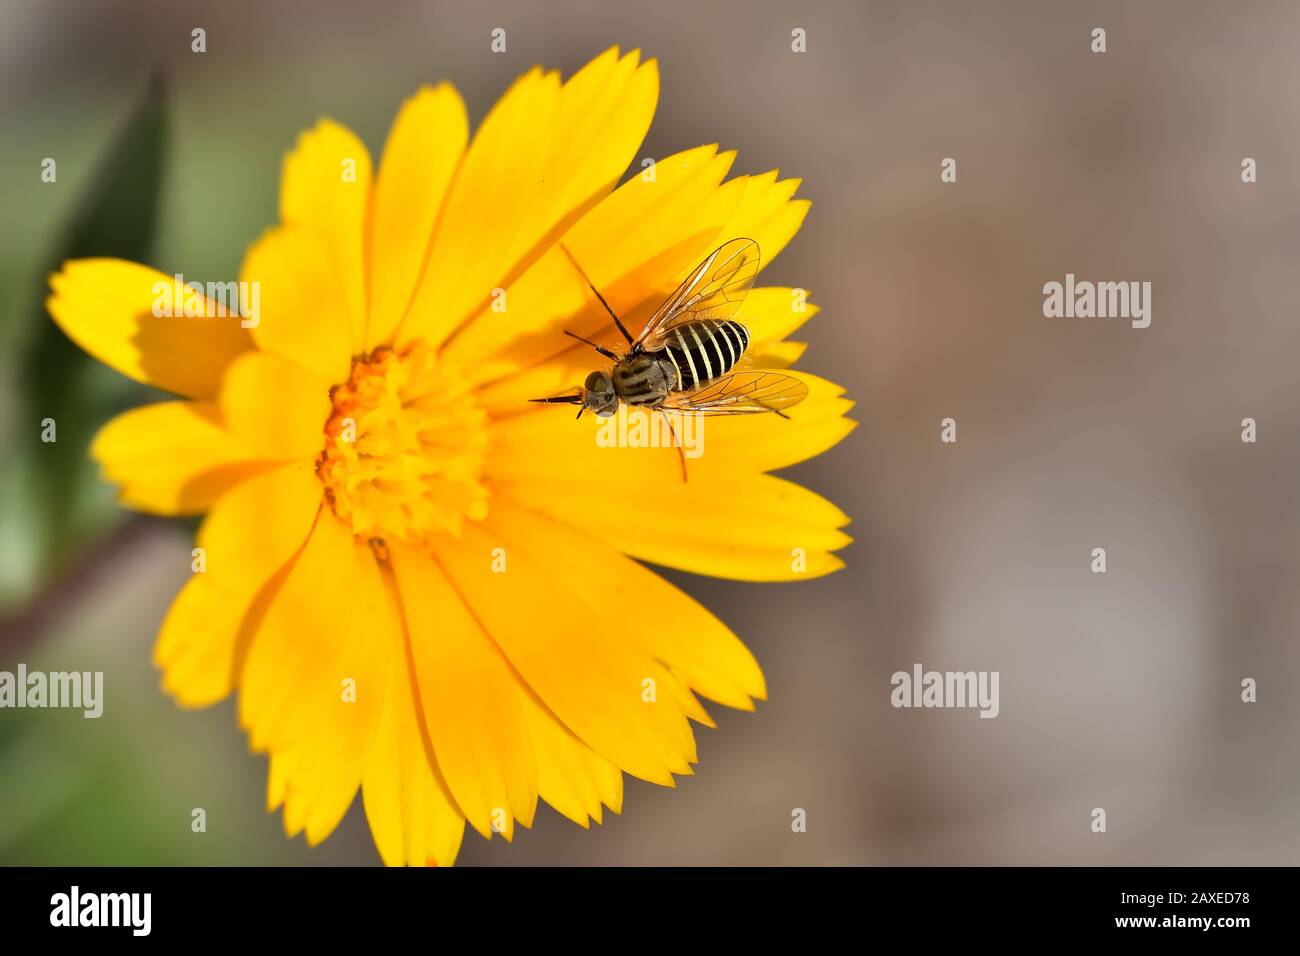 Diptera with stripes on yellow meadow flowers Stock Photo